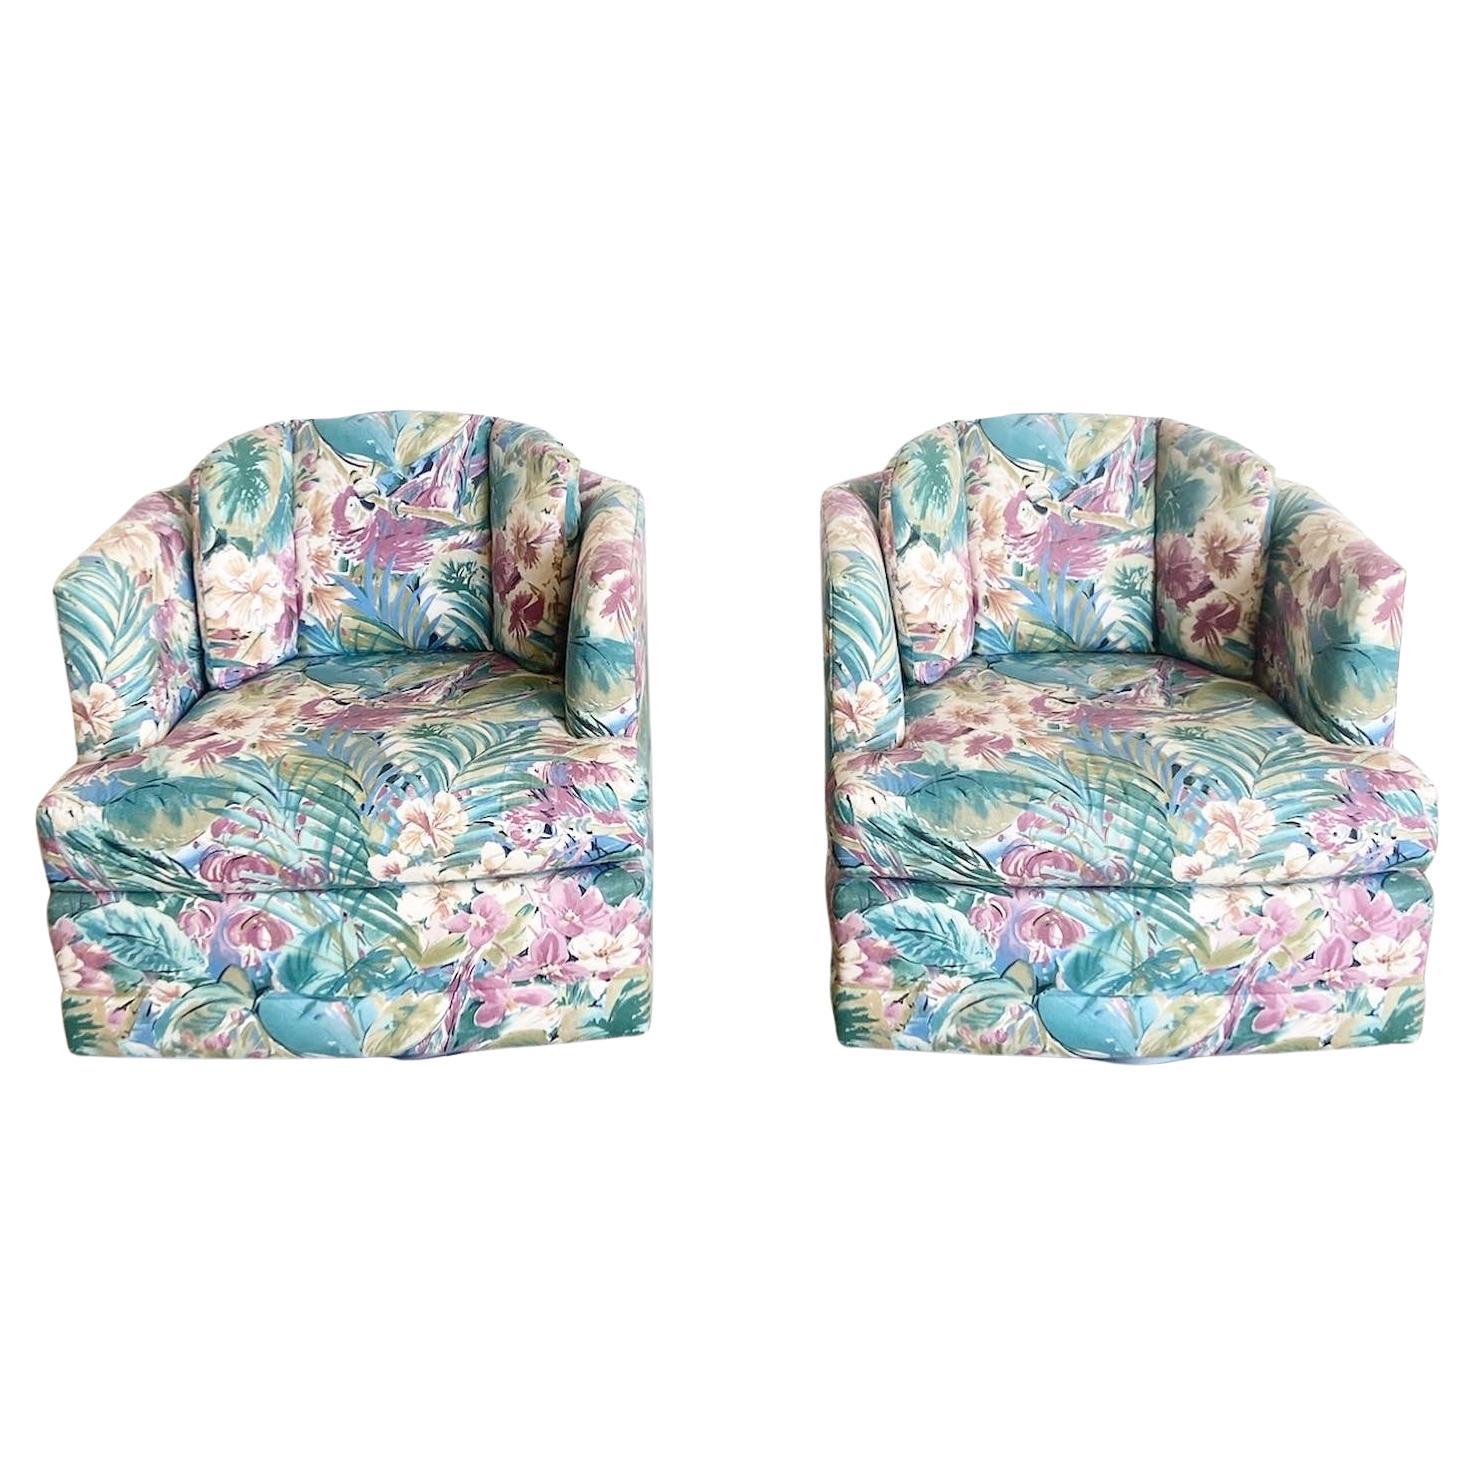 Postmodern Parrot and Foliage Swivel Chairs - a Pair For Sale